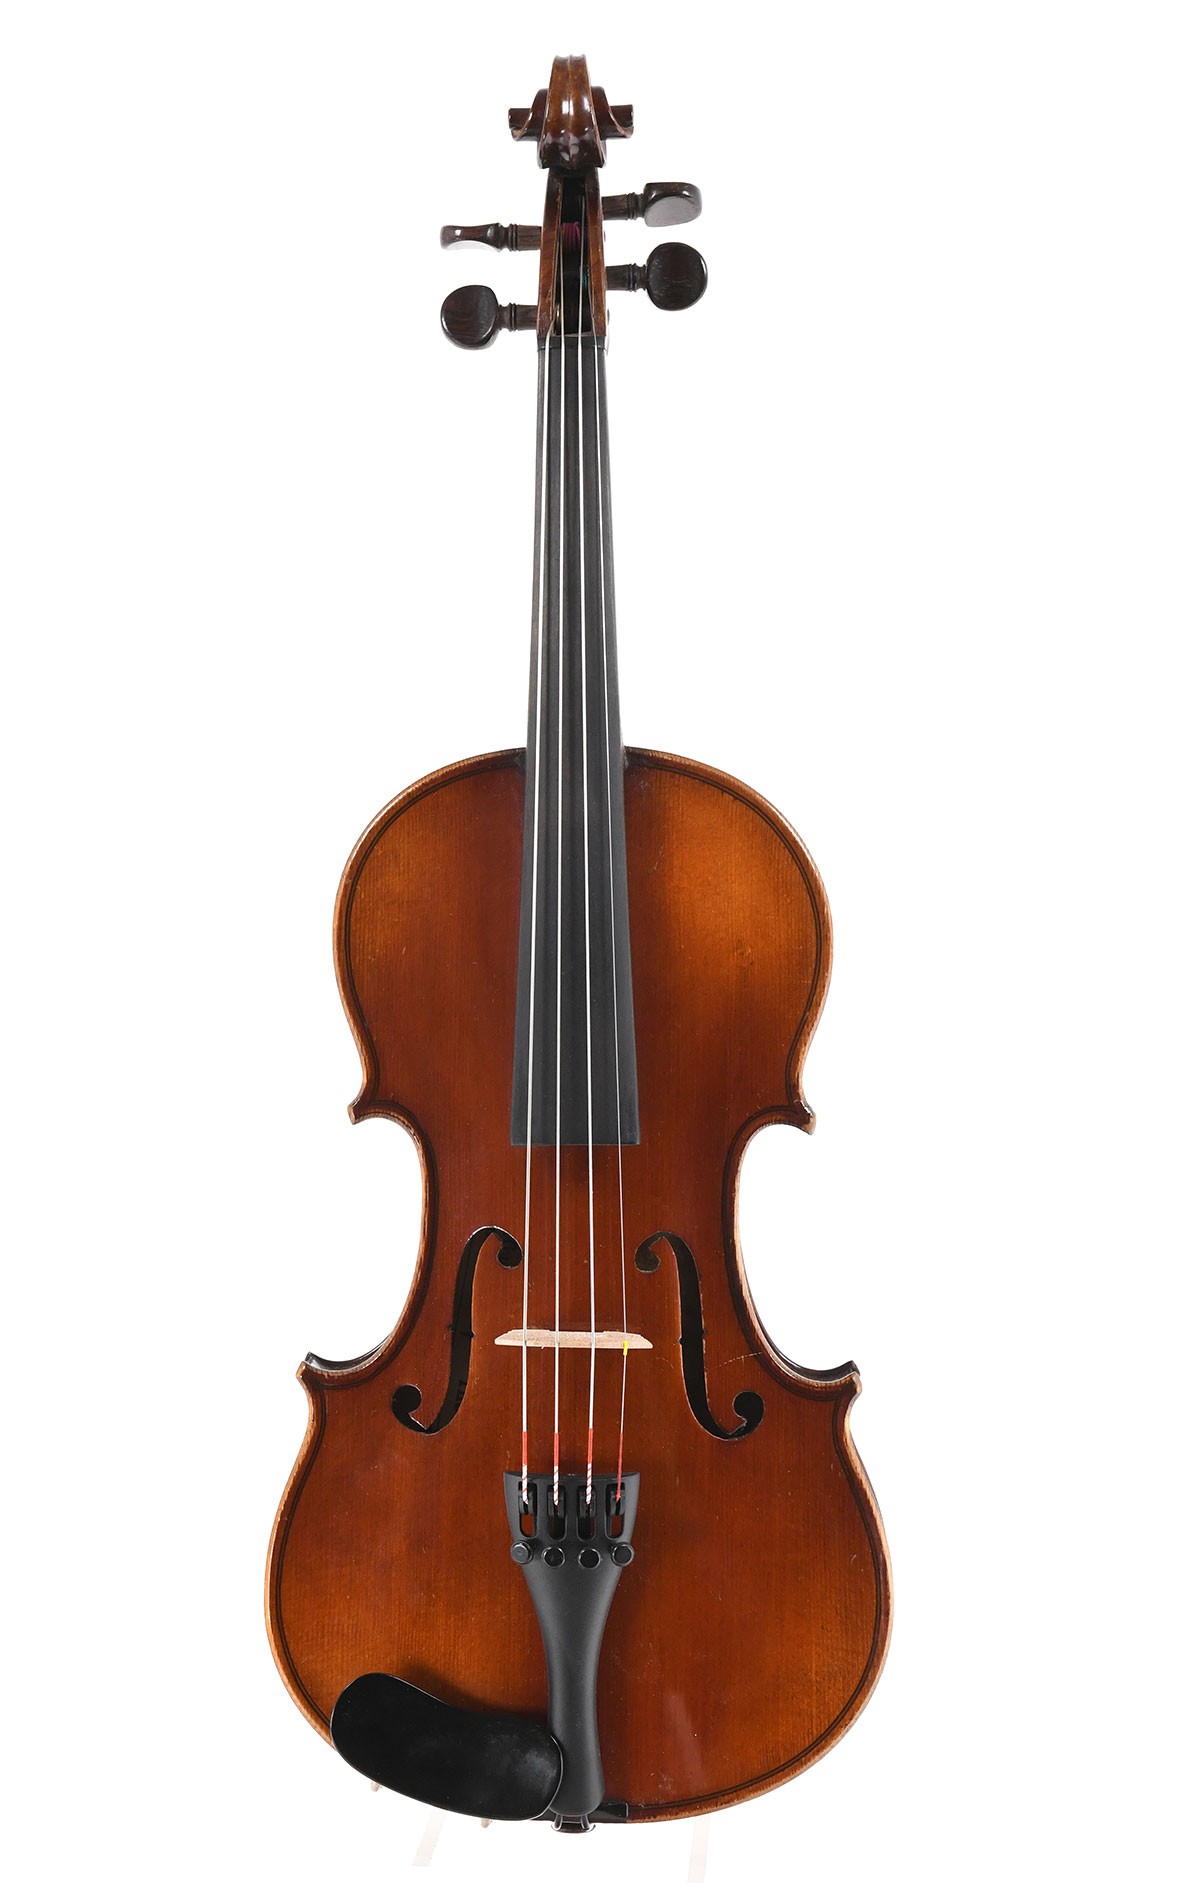 Antique 1/2 violin from Mirecourt after the model Guarnerius